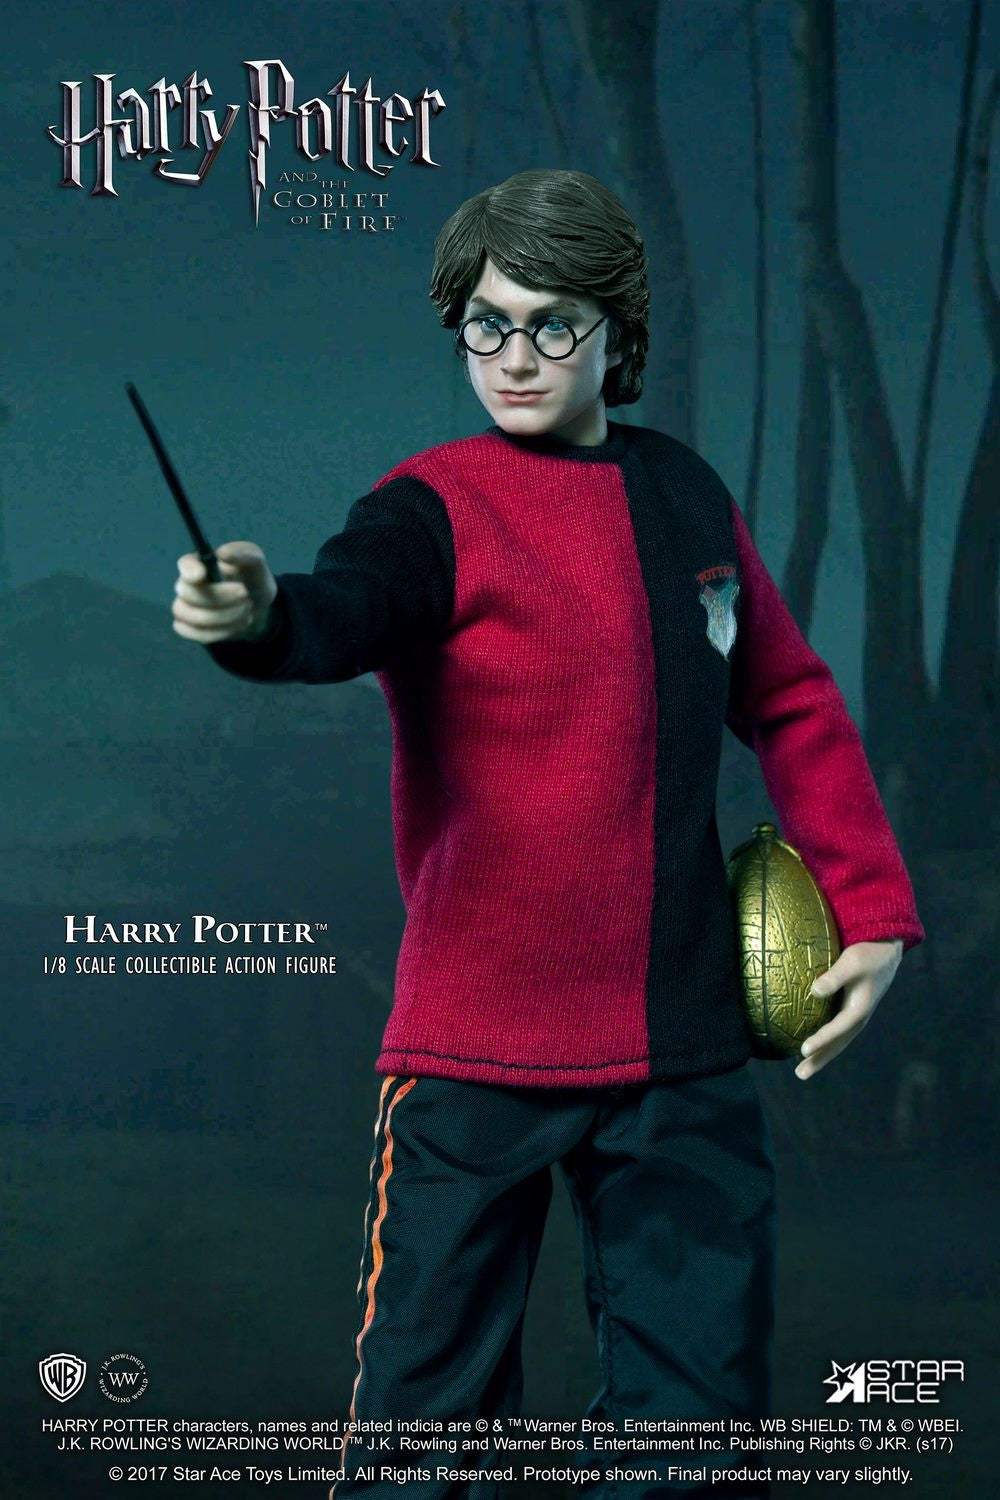 Star Ace Toys - SA8001D - Harry Potter and the Goblet of Fire - Harry Potter (Triwizard Tournament Last Game Version) - Marvelous Toys